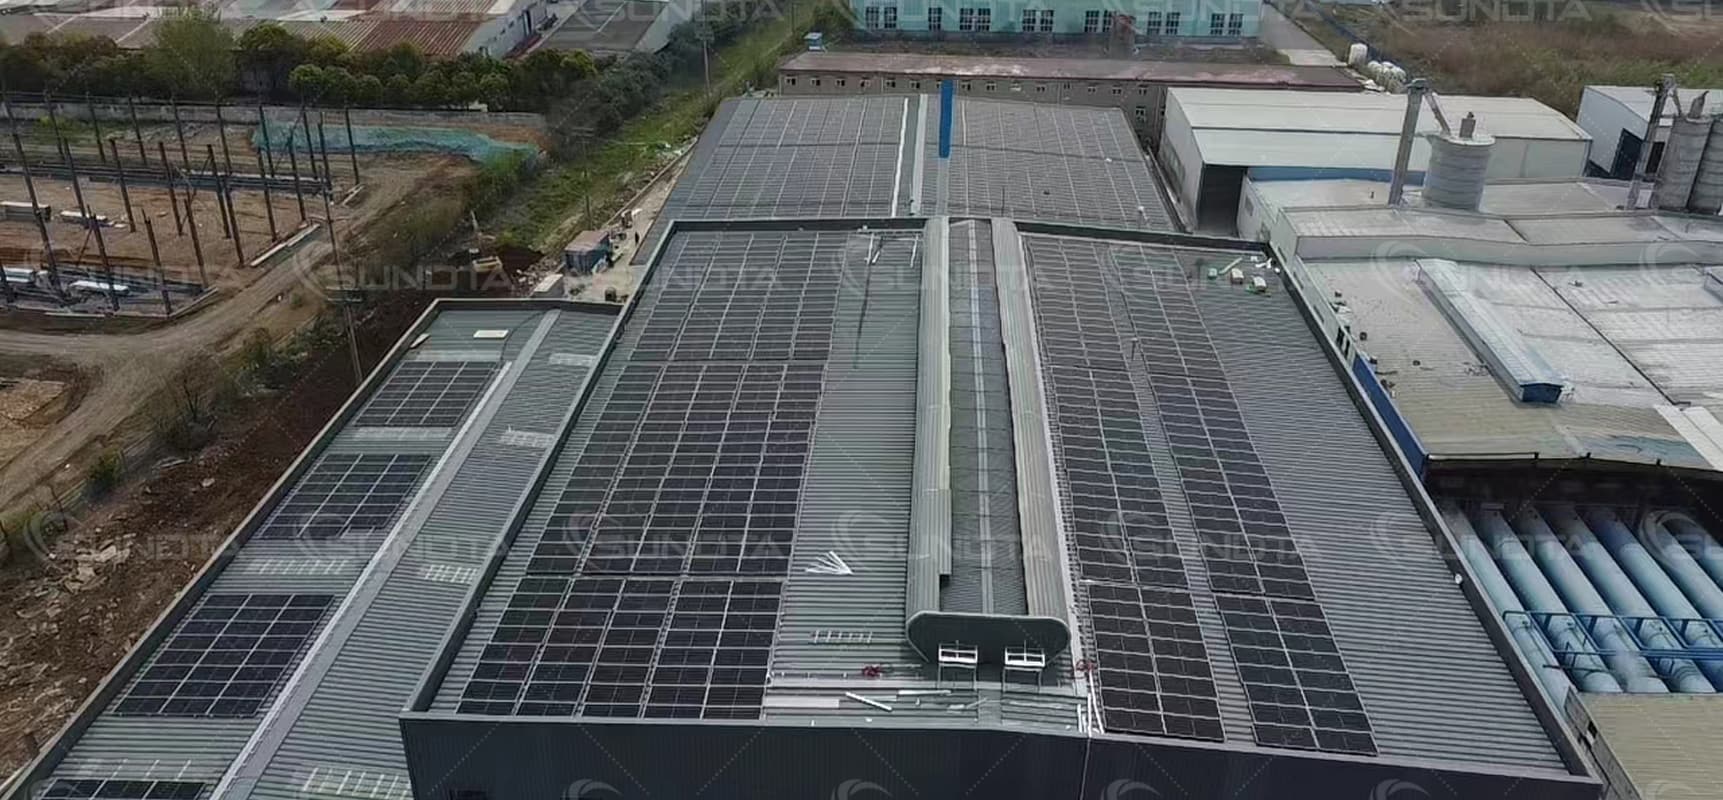 SUNDTA Rooftop Distributed PV Project In China Was Successfully Connected To The Grid